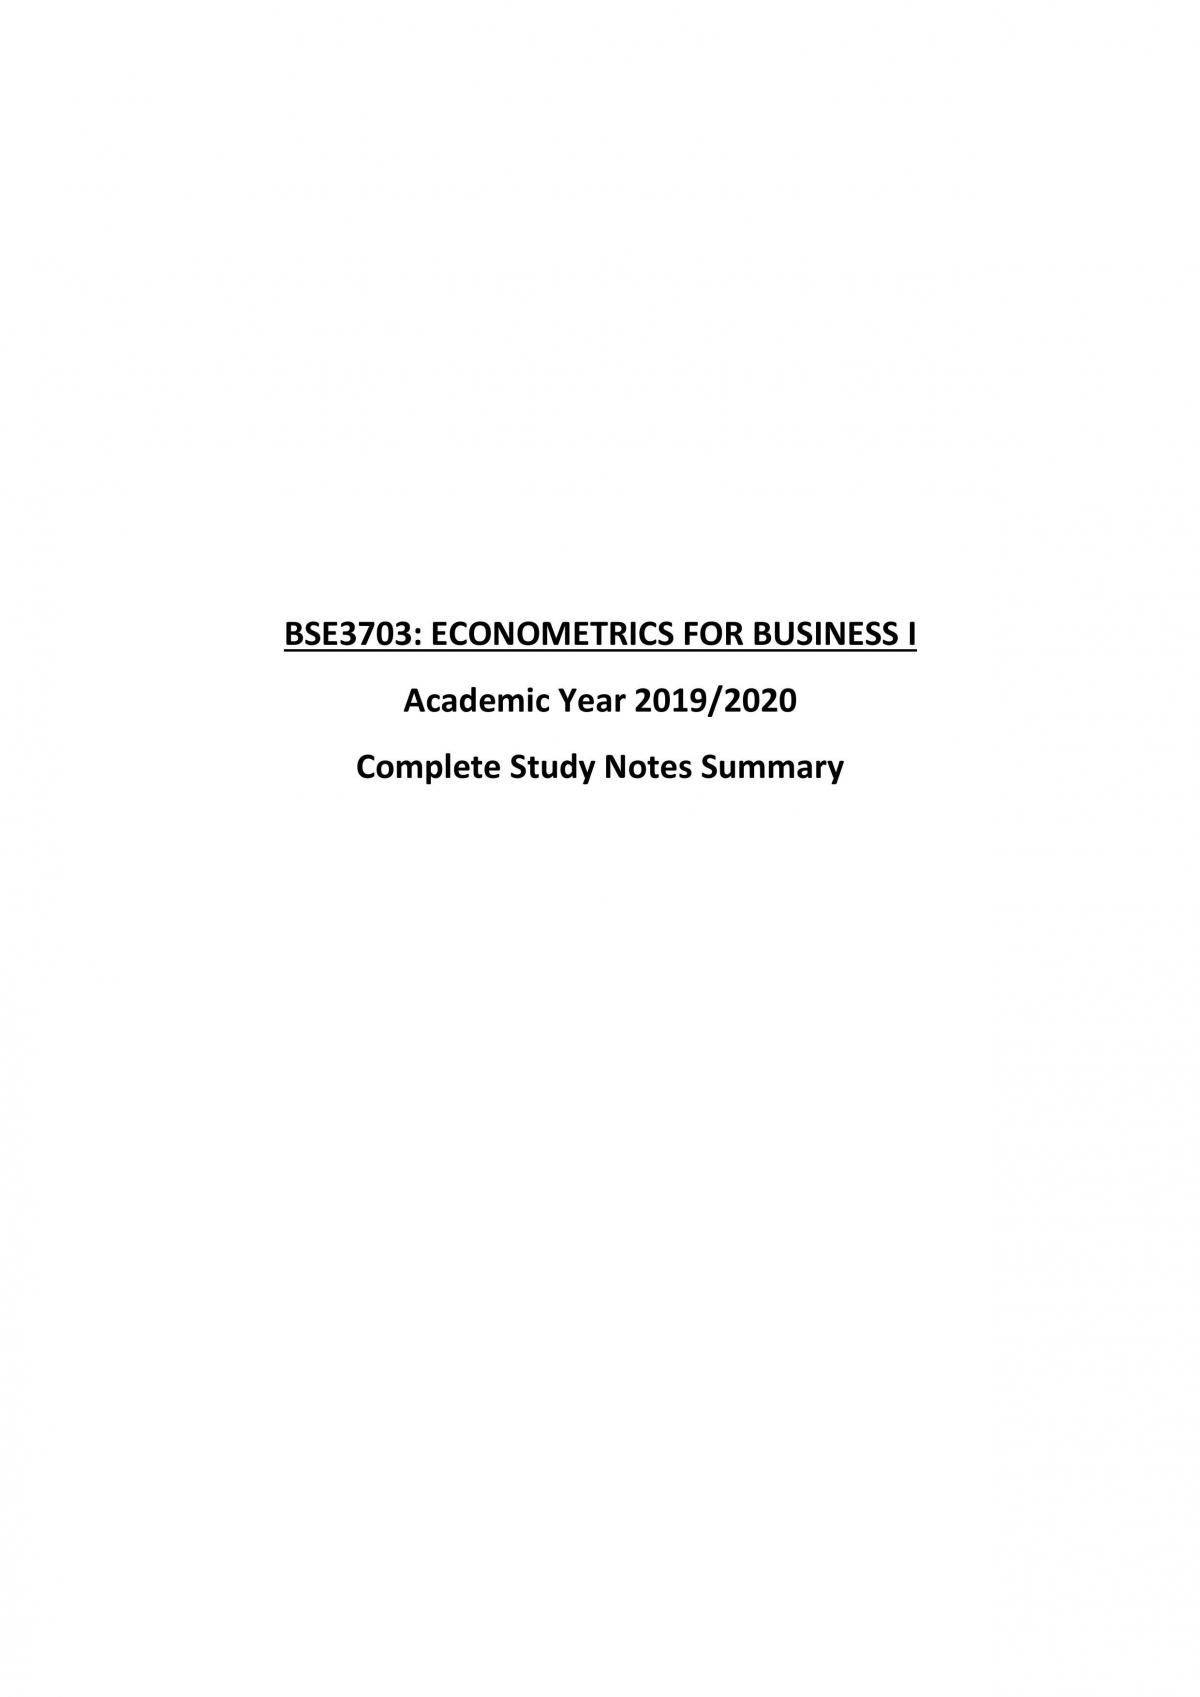 BSE3703 - Econometrics for Business I - Page 1